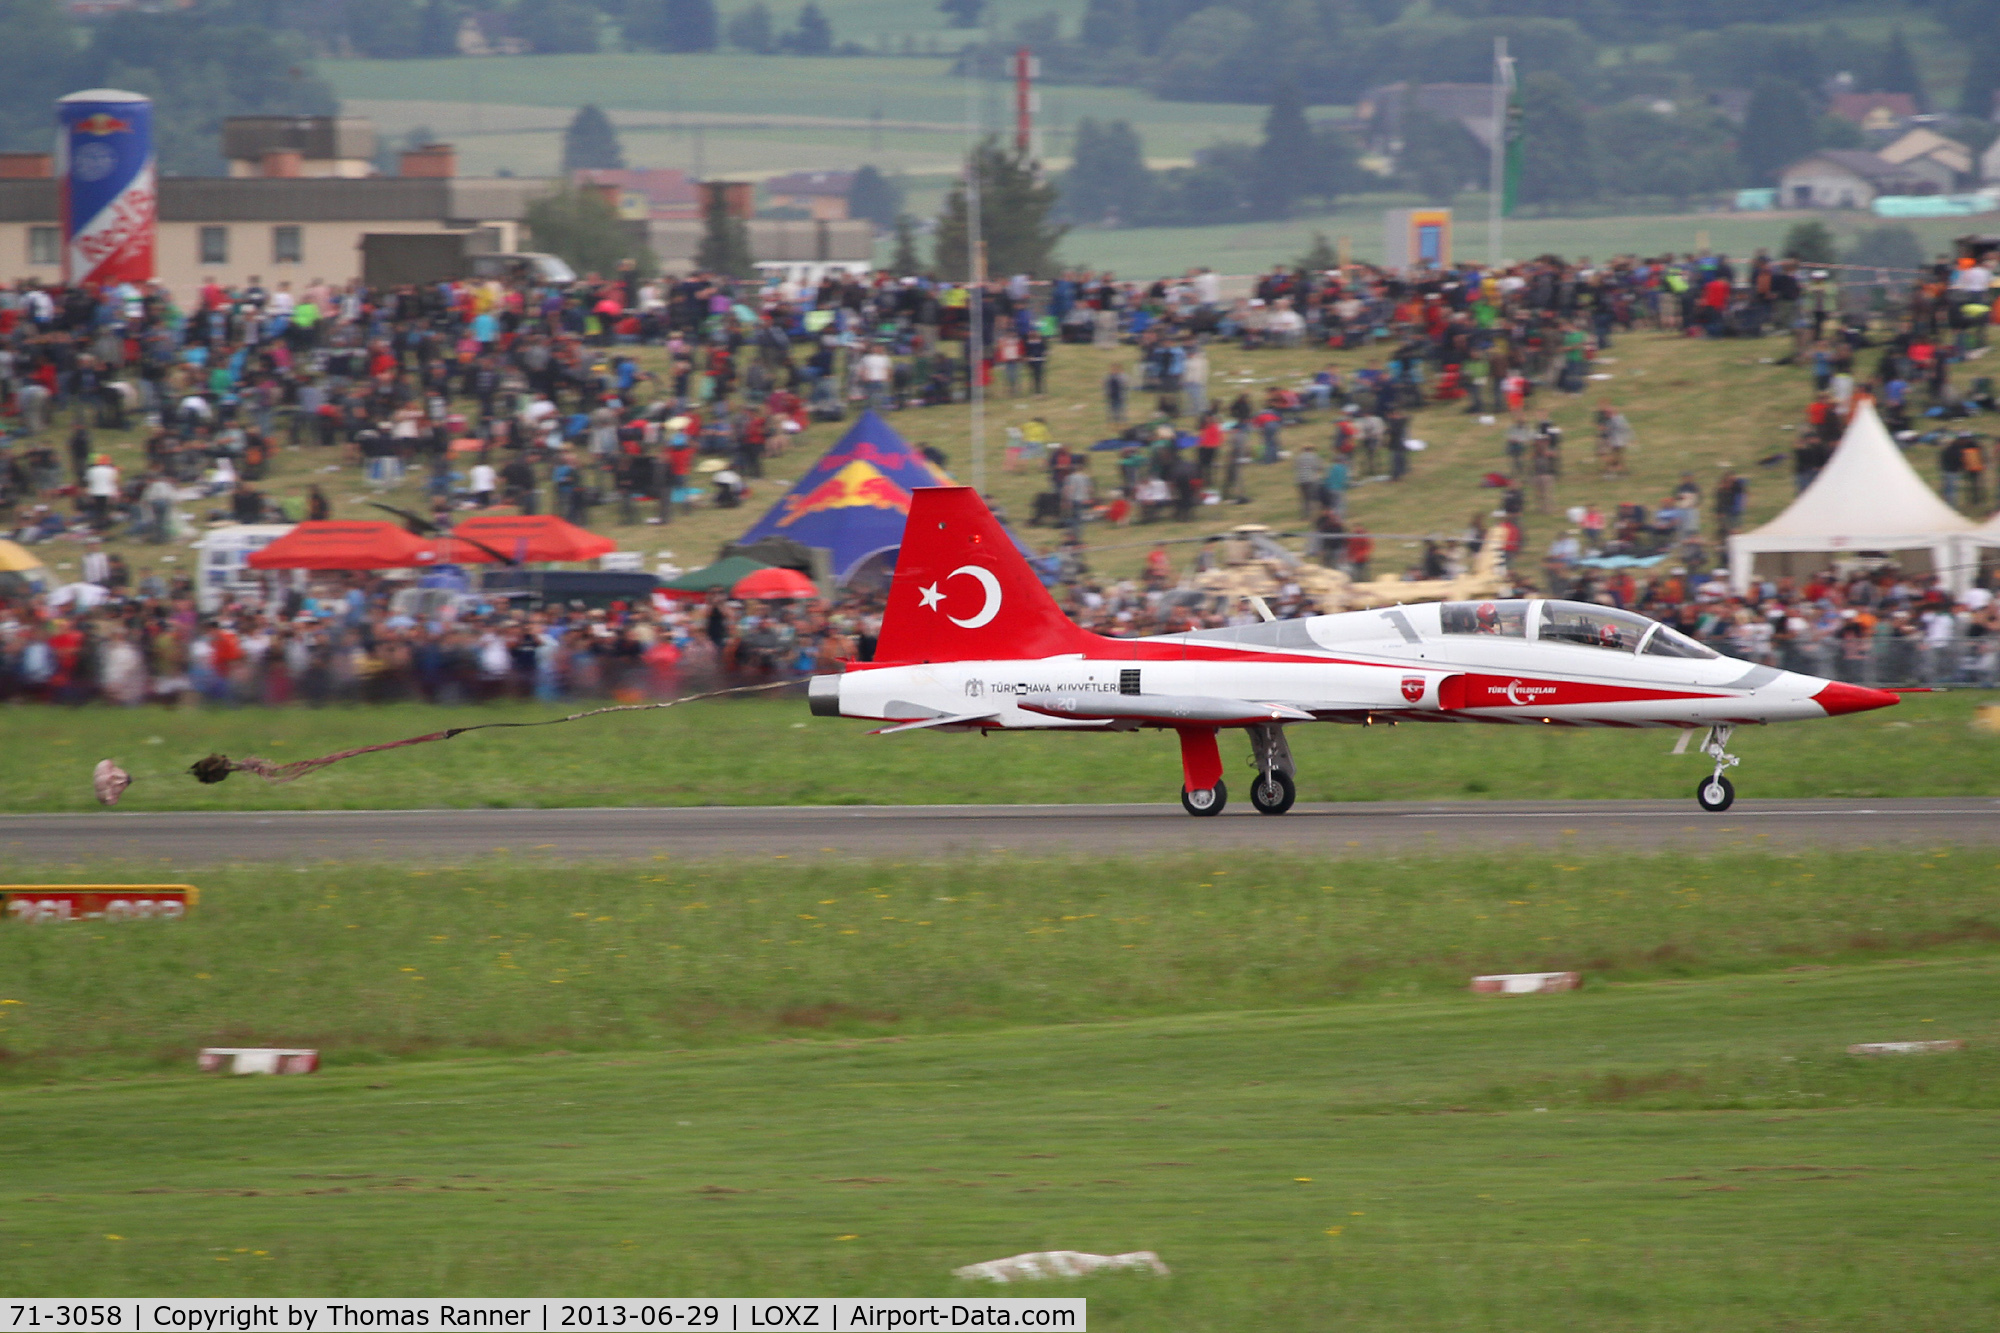 71-3058, 1971 Canadair NF-5A Freedom Fighter C/N 3058, Turkish Stars